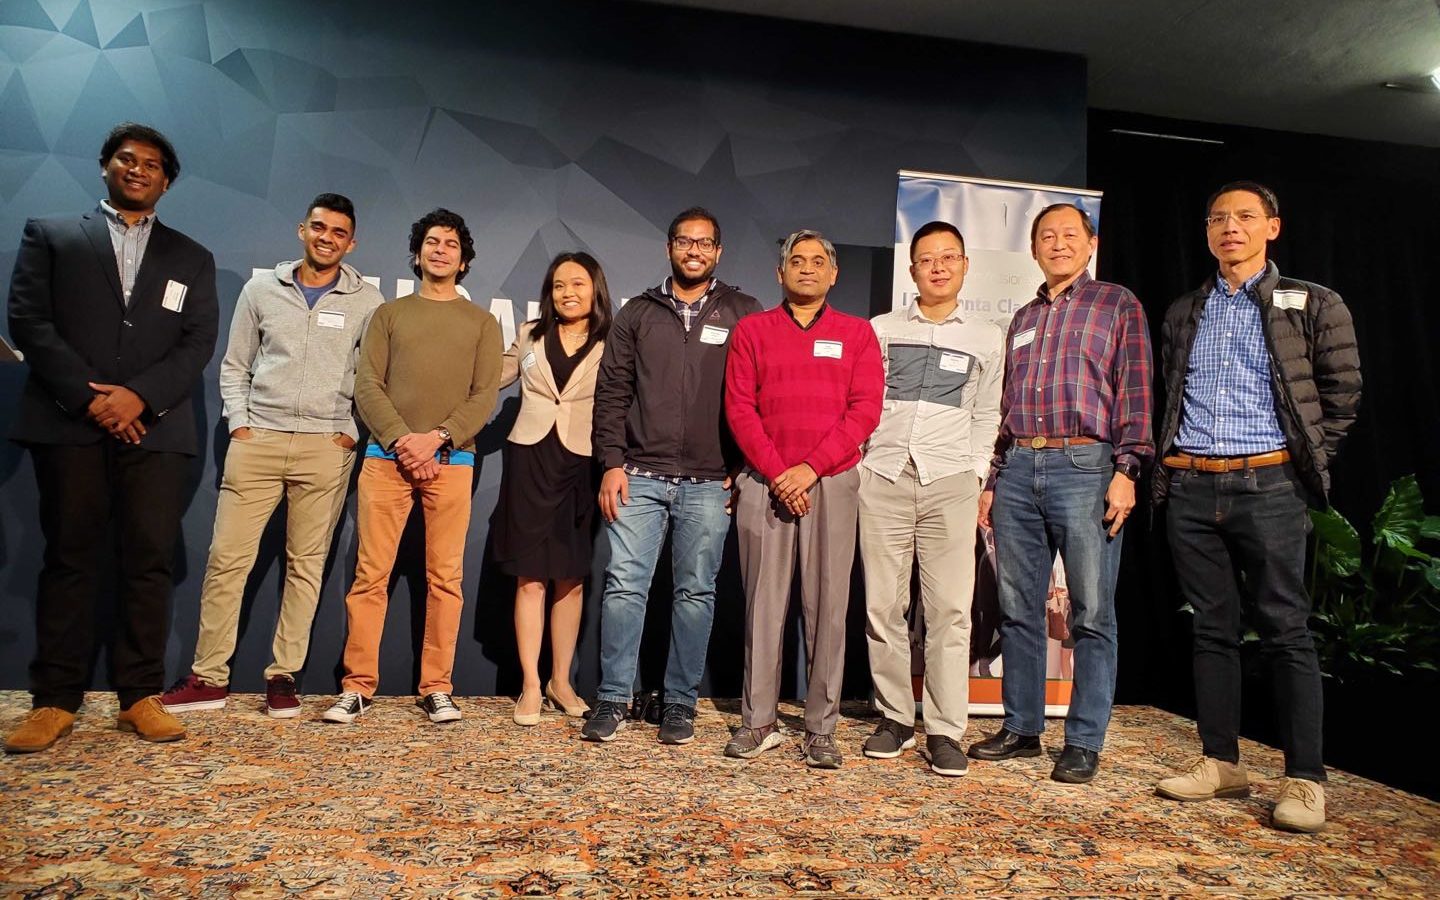 Industry 4.0 Startup Pitch Competition at Plug and Play, Dec 13, 2019